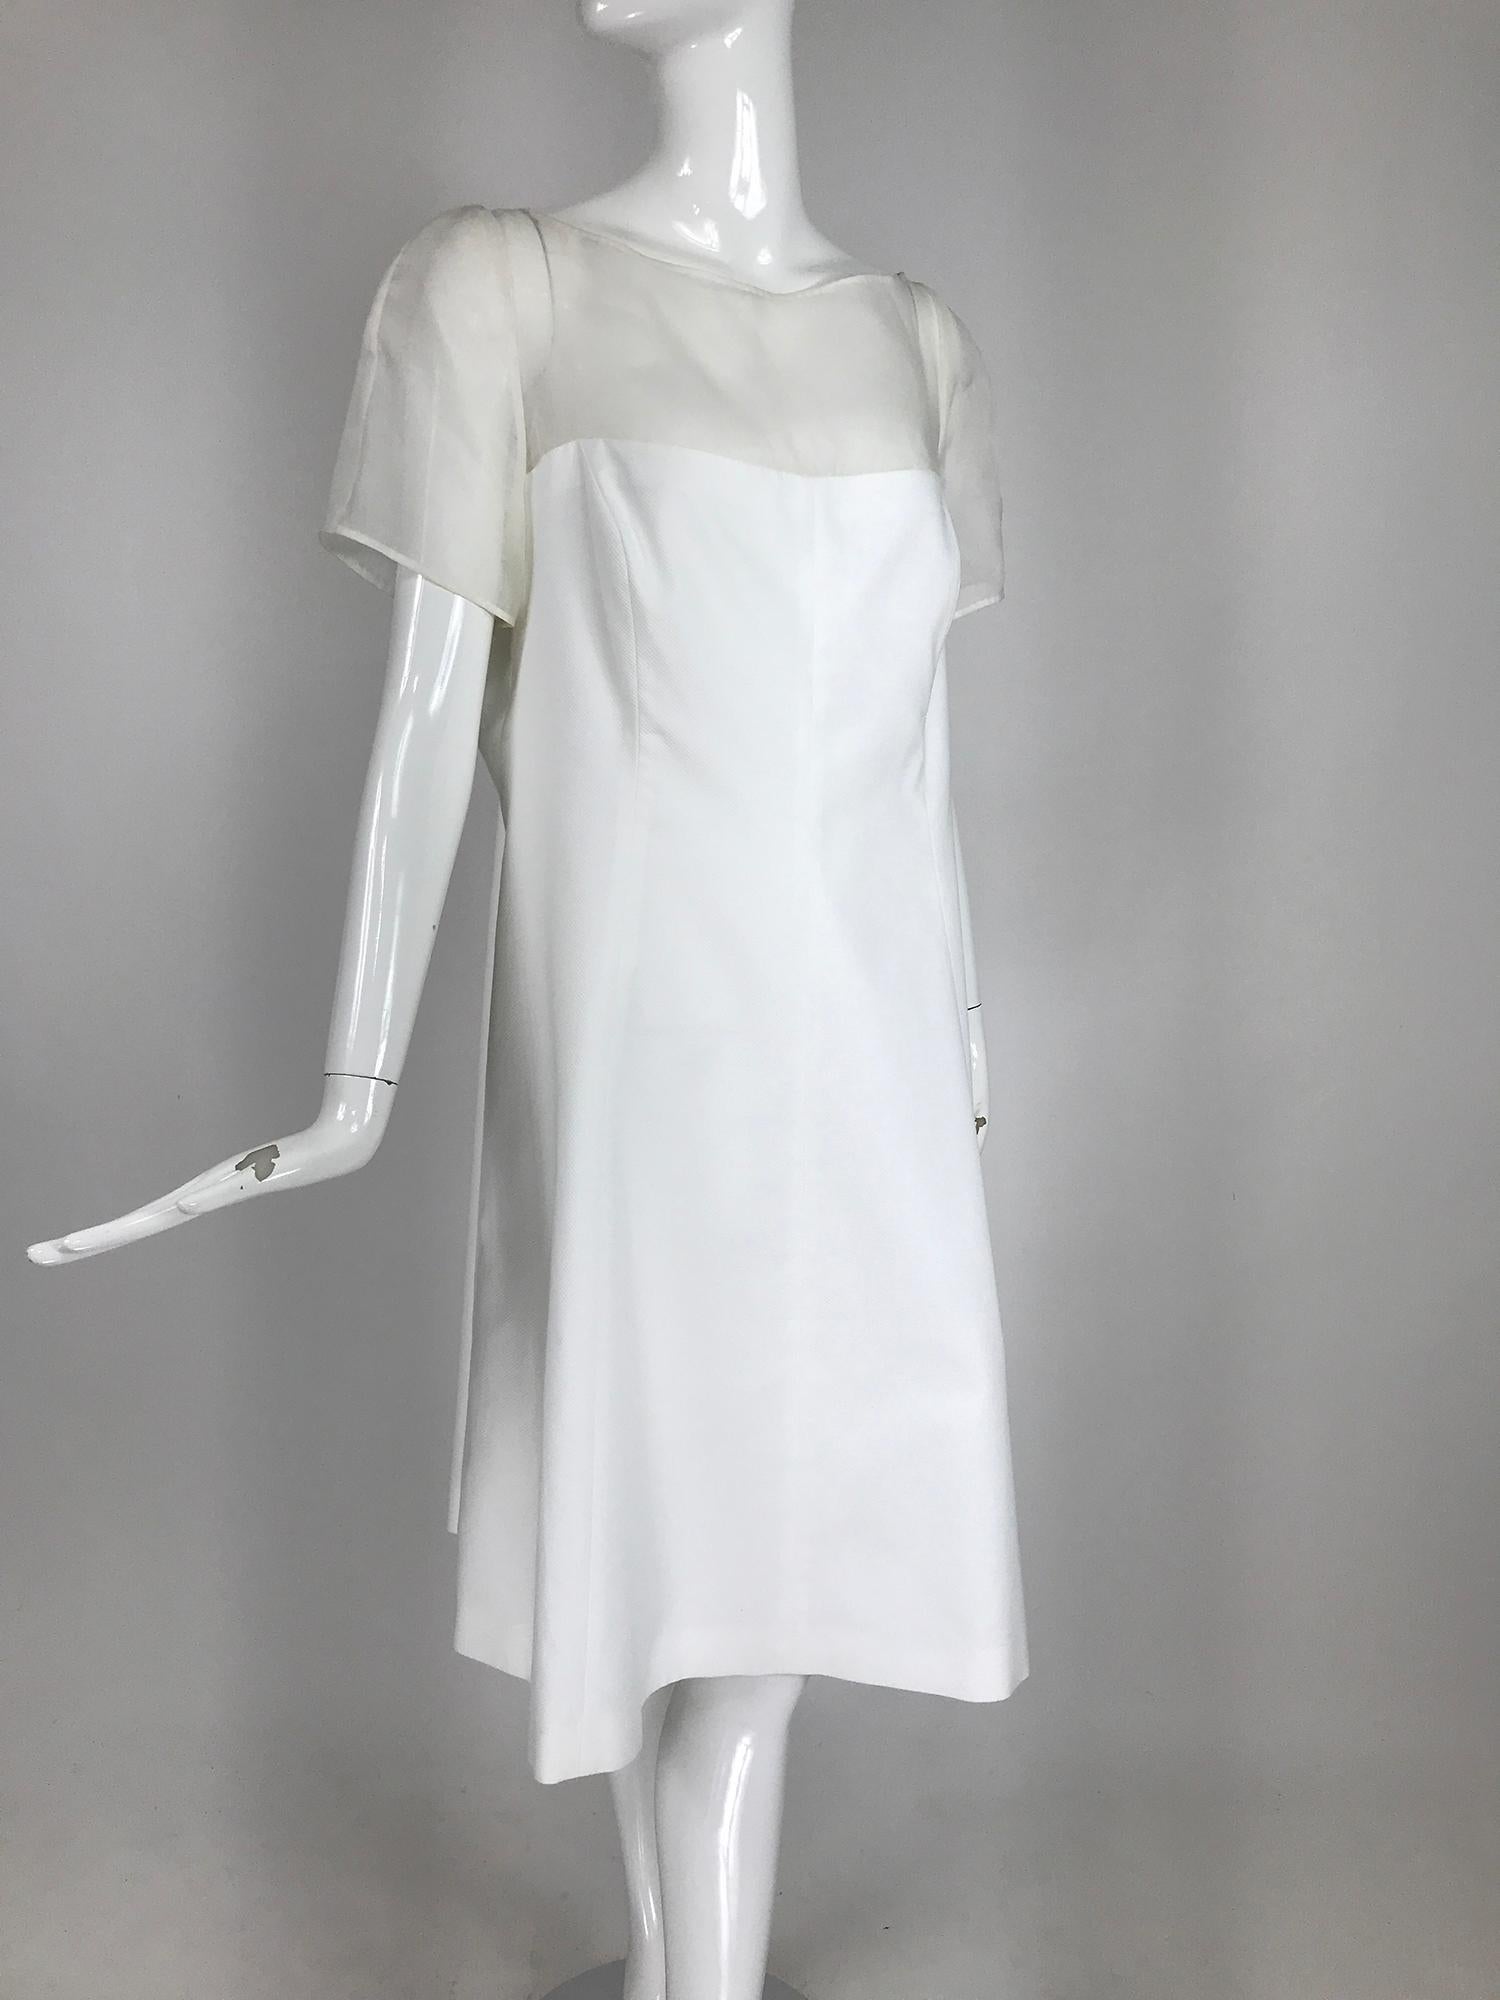 Rena Lange white cotton pique and silk organza day dress, marked US 14. 
Princess seam dress with an upper bodice and sleeves of double silk organza. The dress is crisp cotton pique. Dress closes at the back with a zipper, the organza top is open,